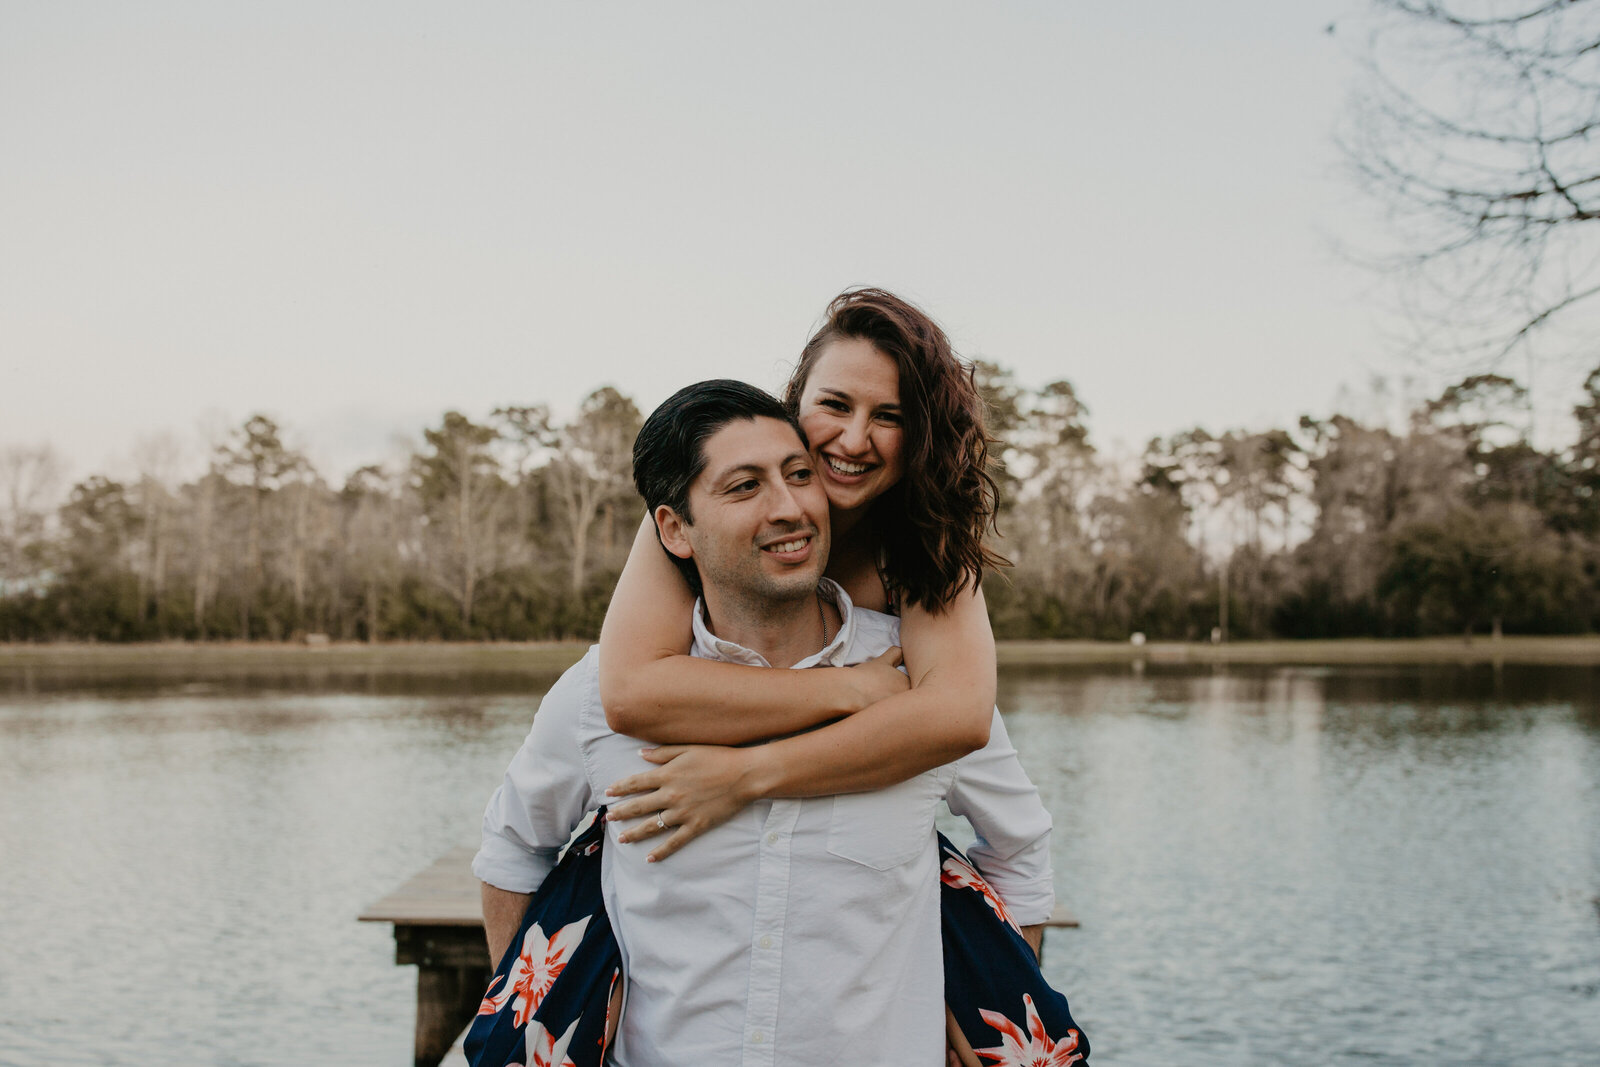 Burroughs Park spring engagement session in Tomball, Texas